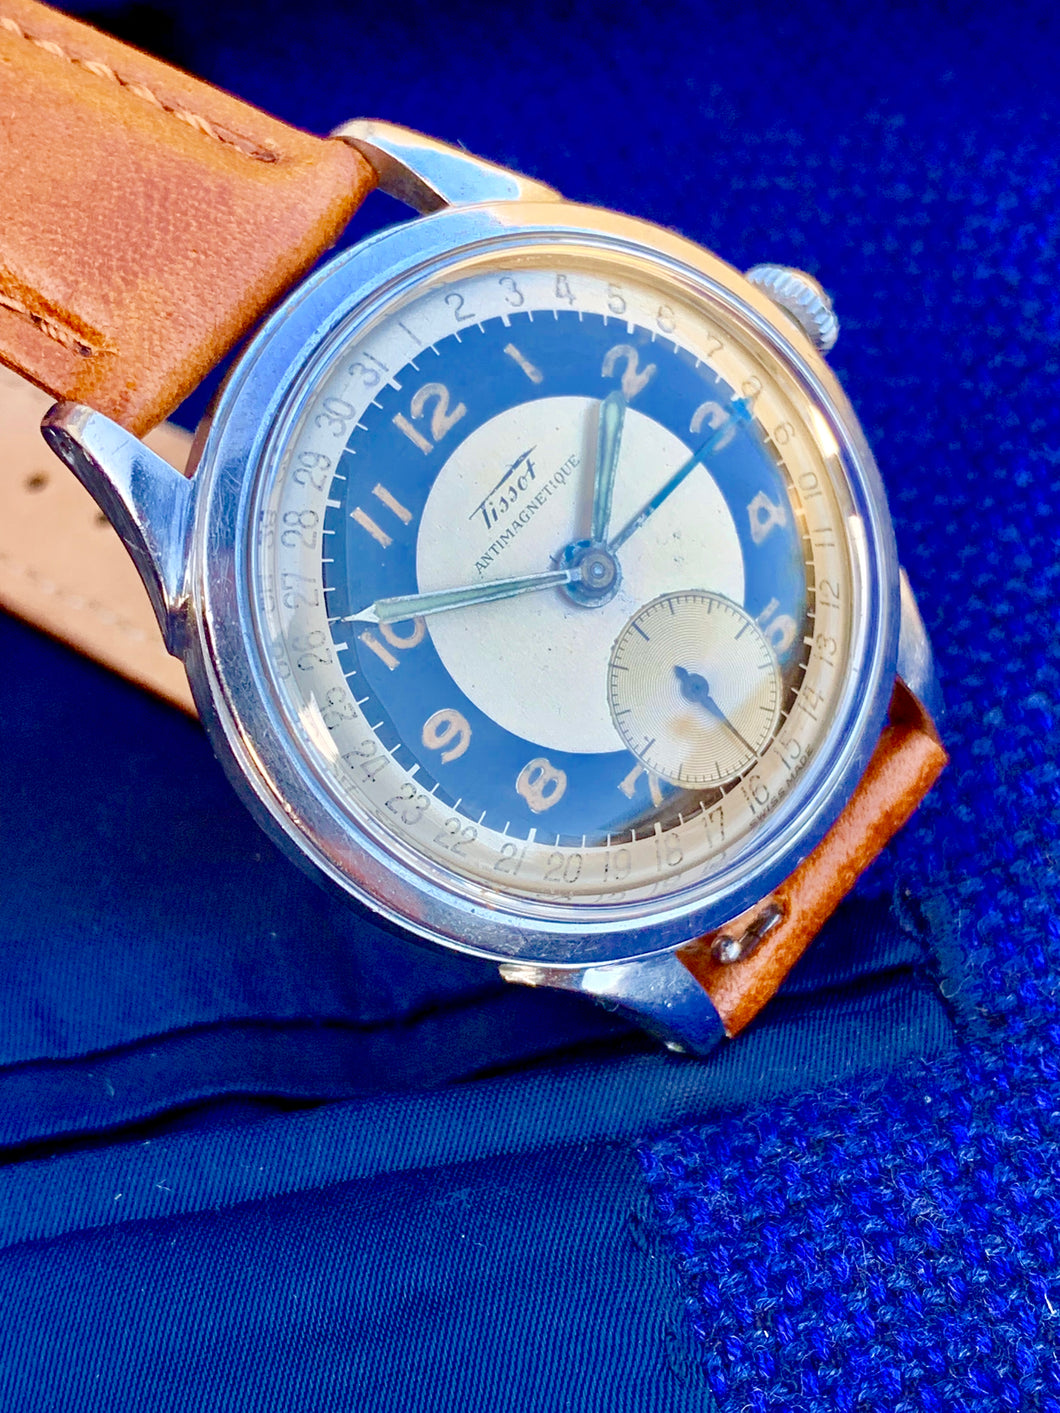 1948 Tissot Pointerdate with the famous cal. 27